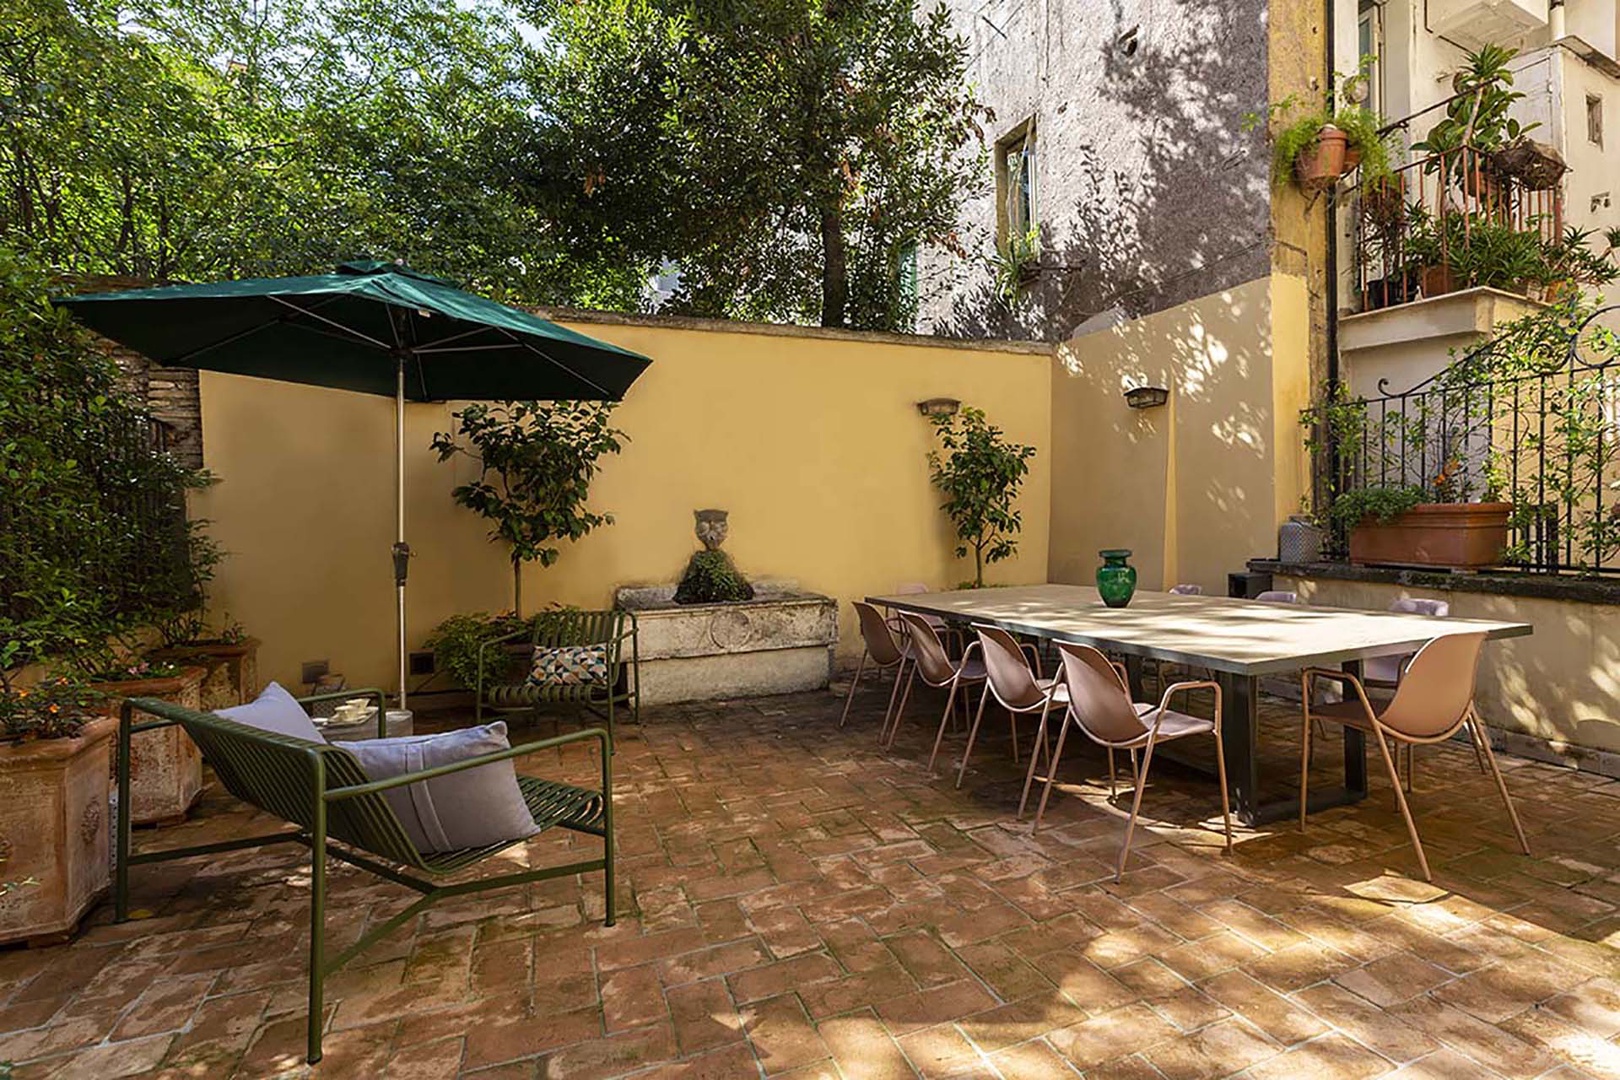 Large private garden terrace perfect for relaxing and dining together.